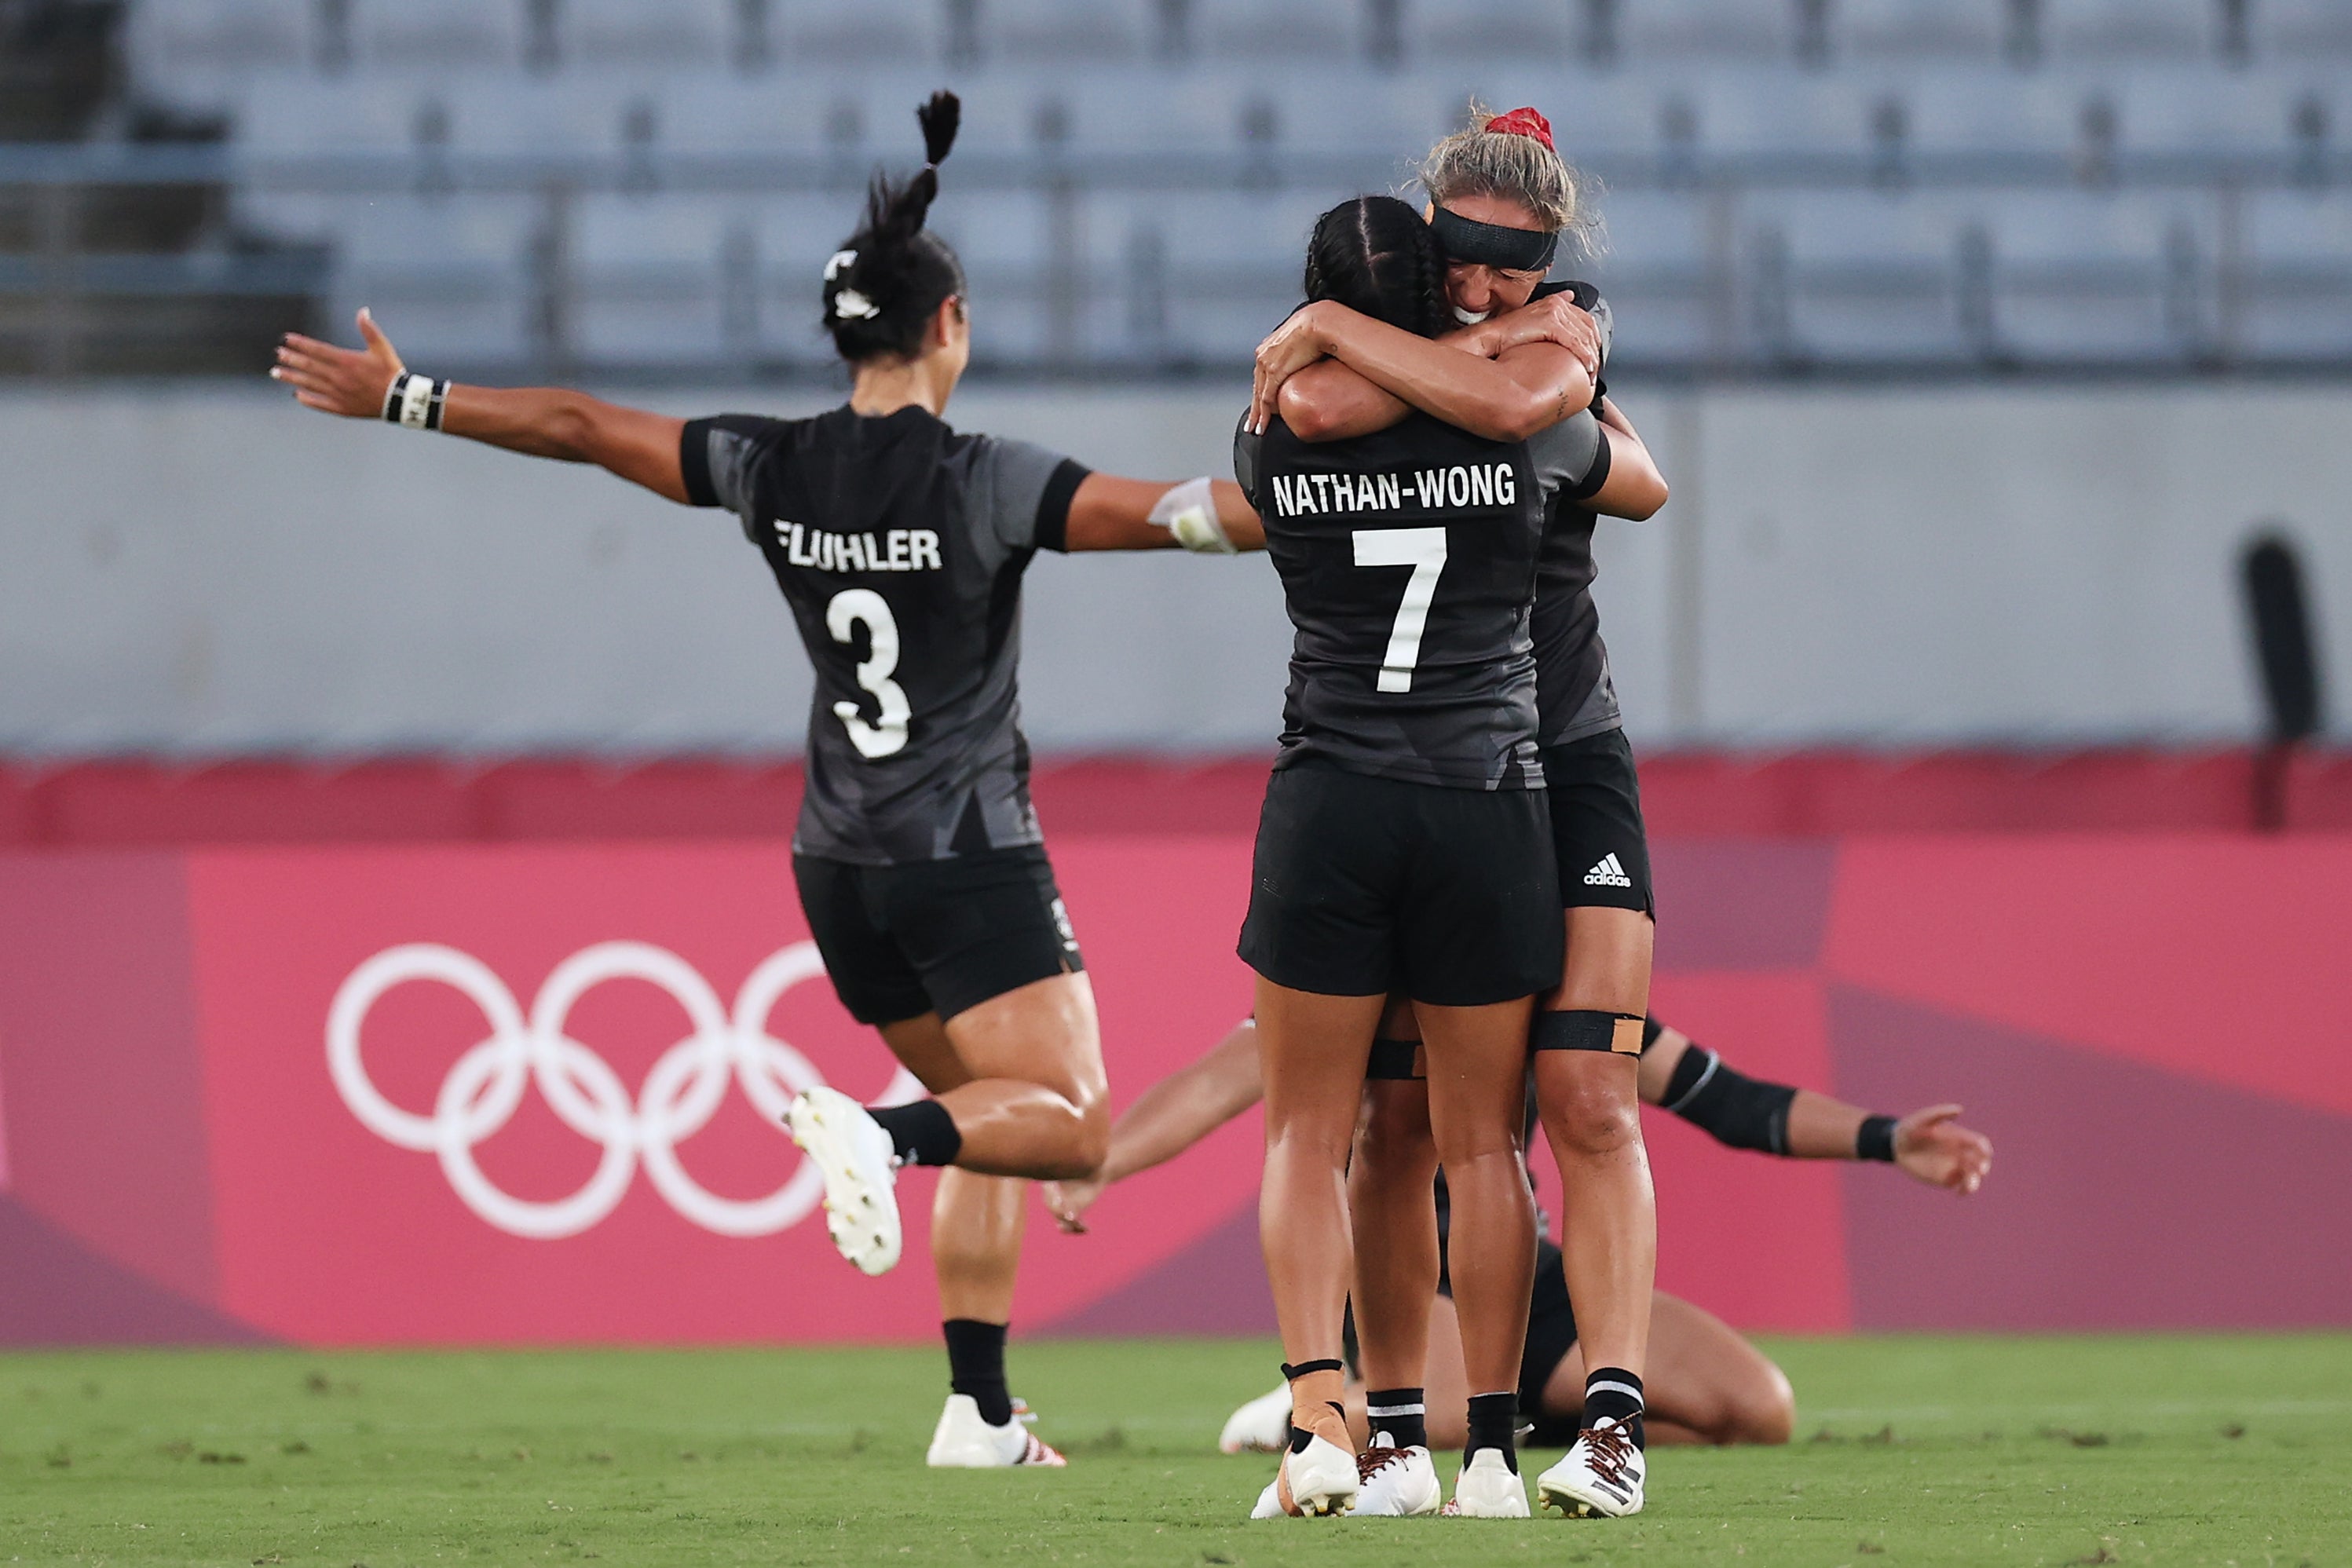 New Zealand’s women secured Olympic sevens gold at Tokyo 2020